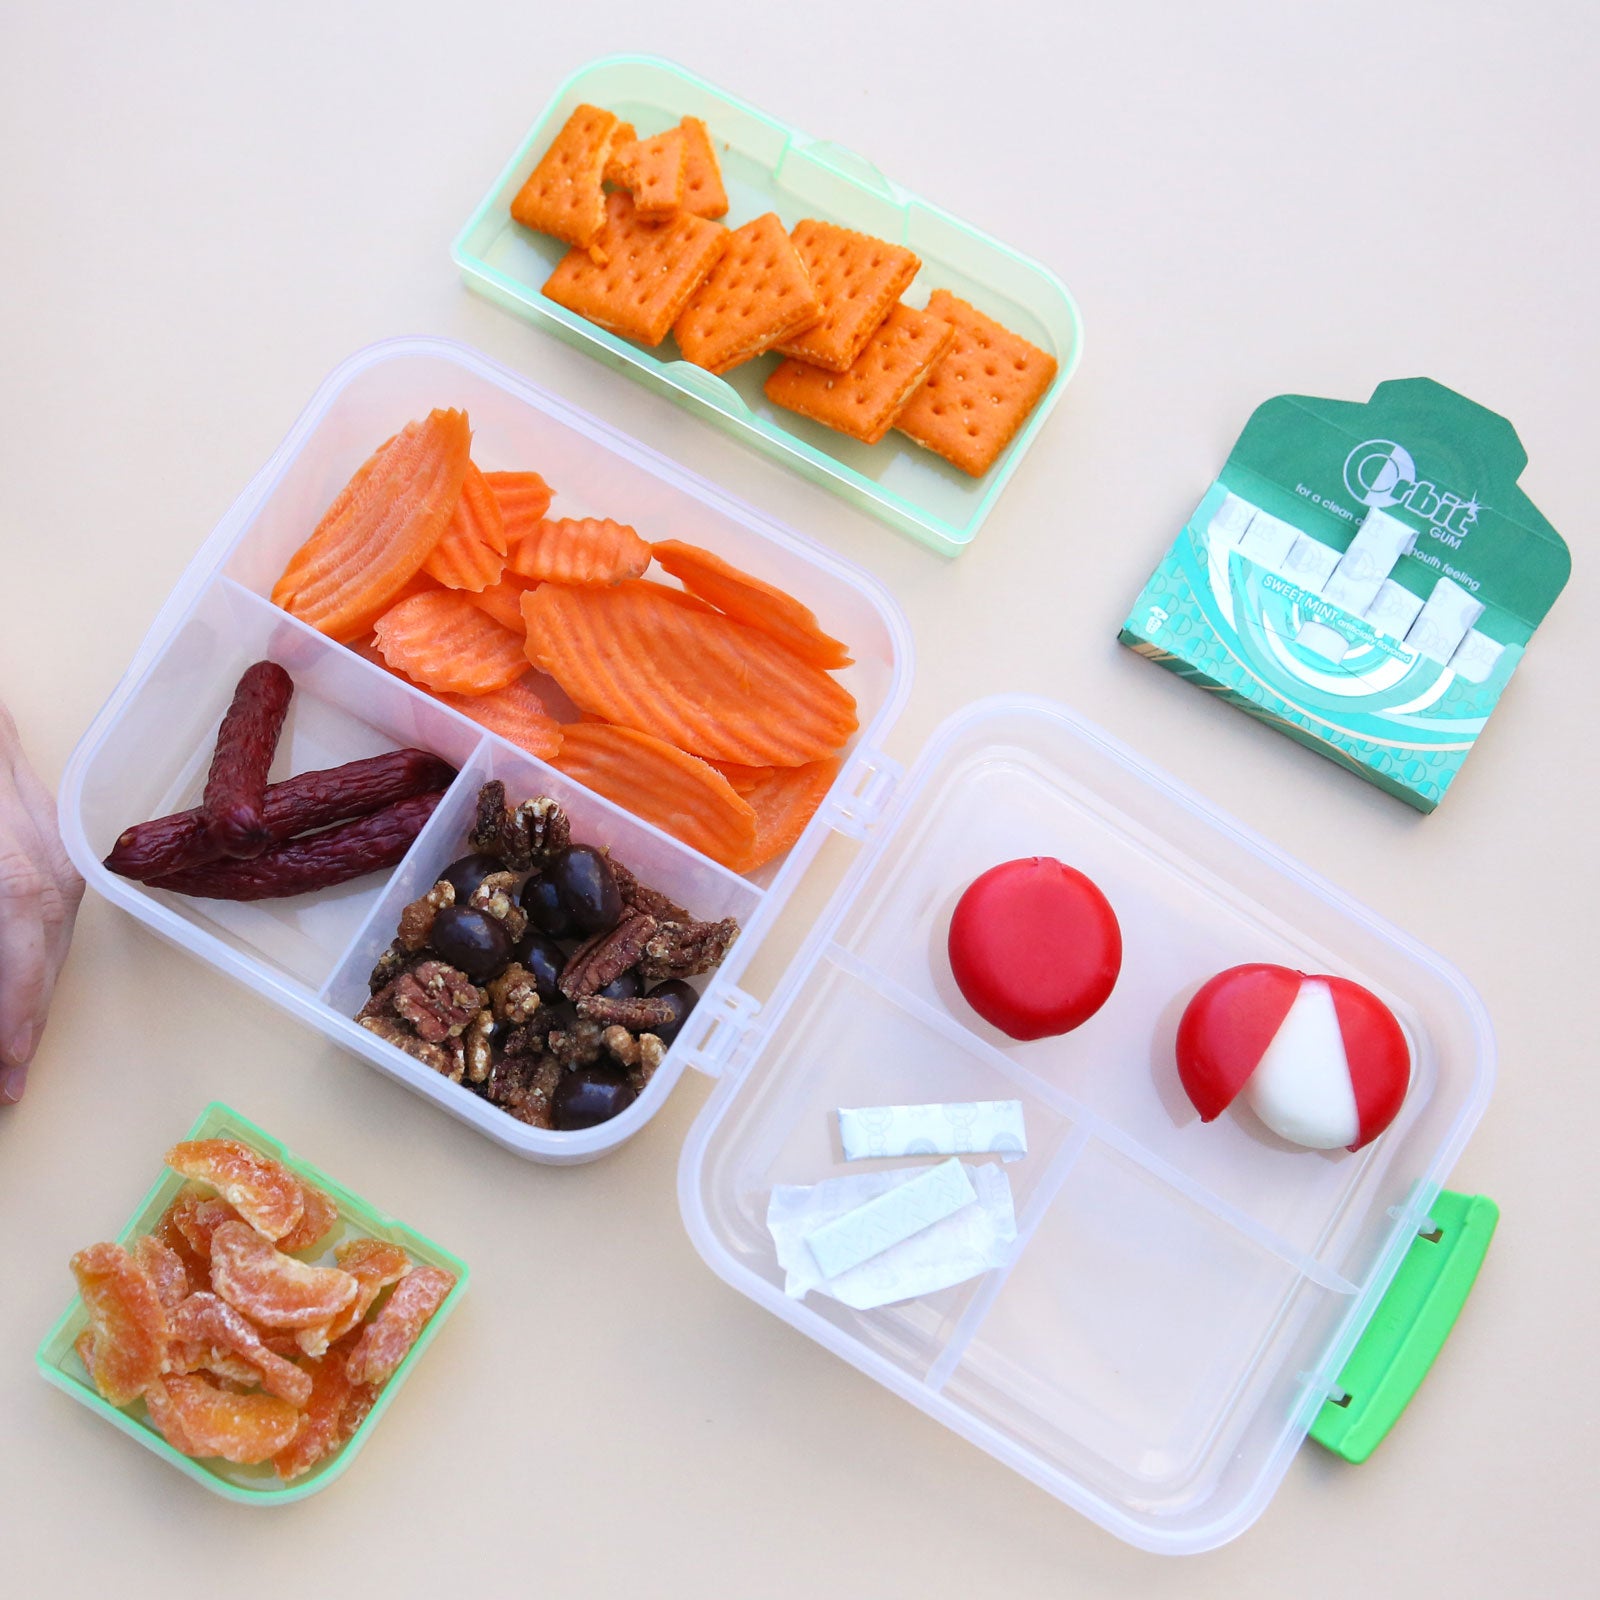 Avoid airline food, pack your own bento lunch